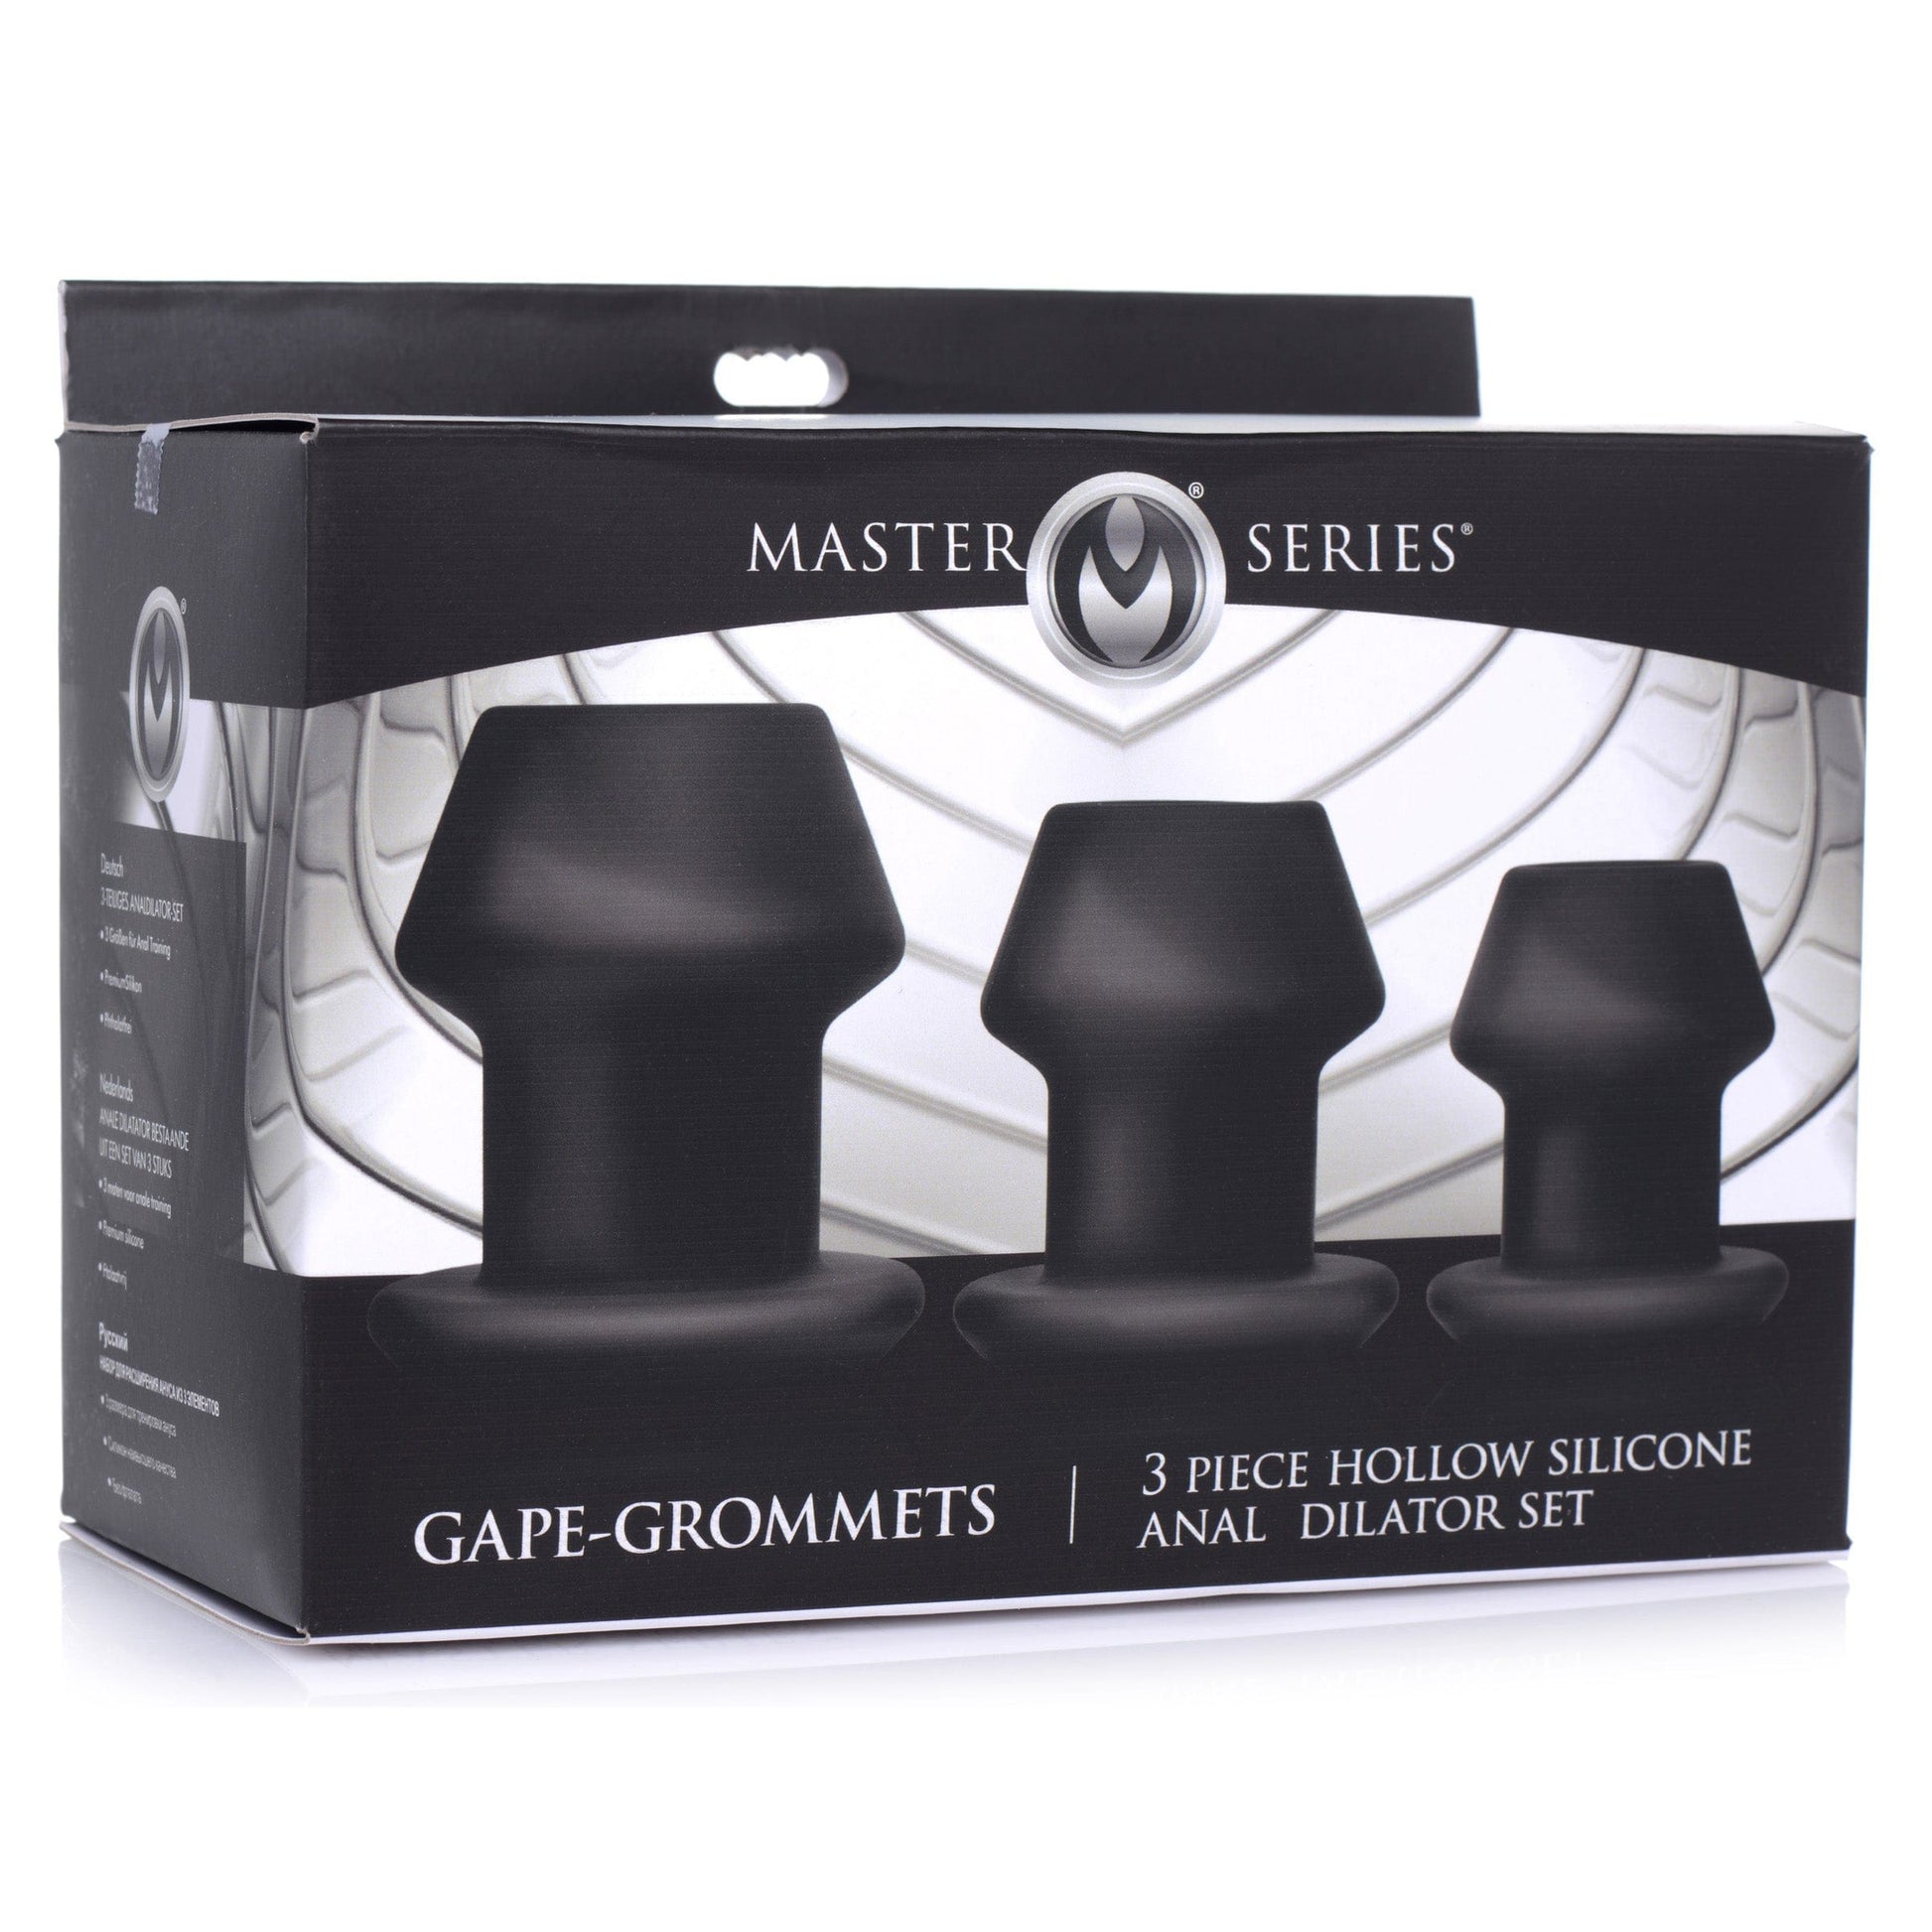 Master Series Hollow Plug Gape-grommets 3 Piece Hollow Silicone Anal Dilator Set at the Haus of Shag